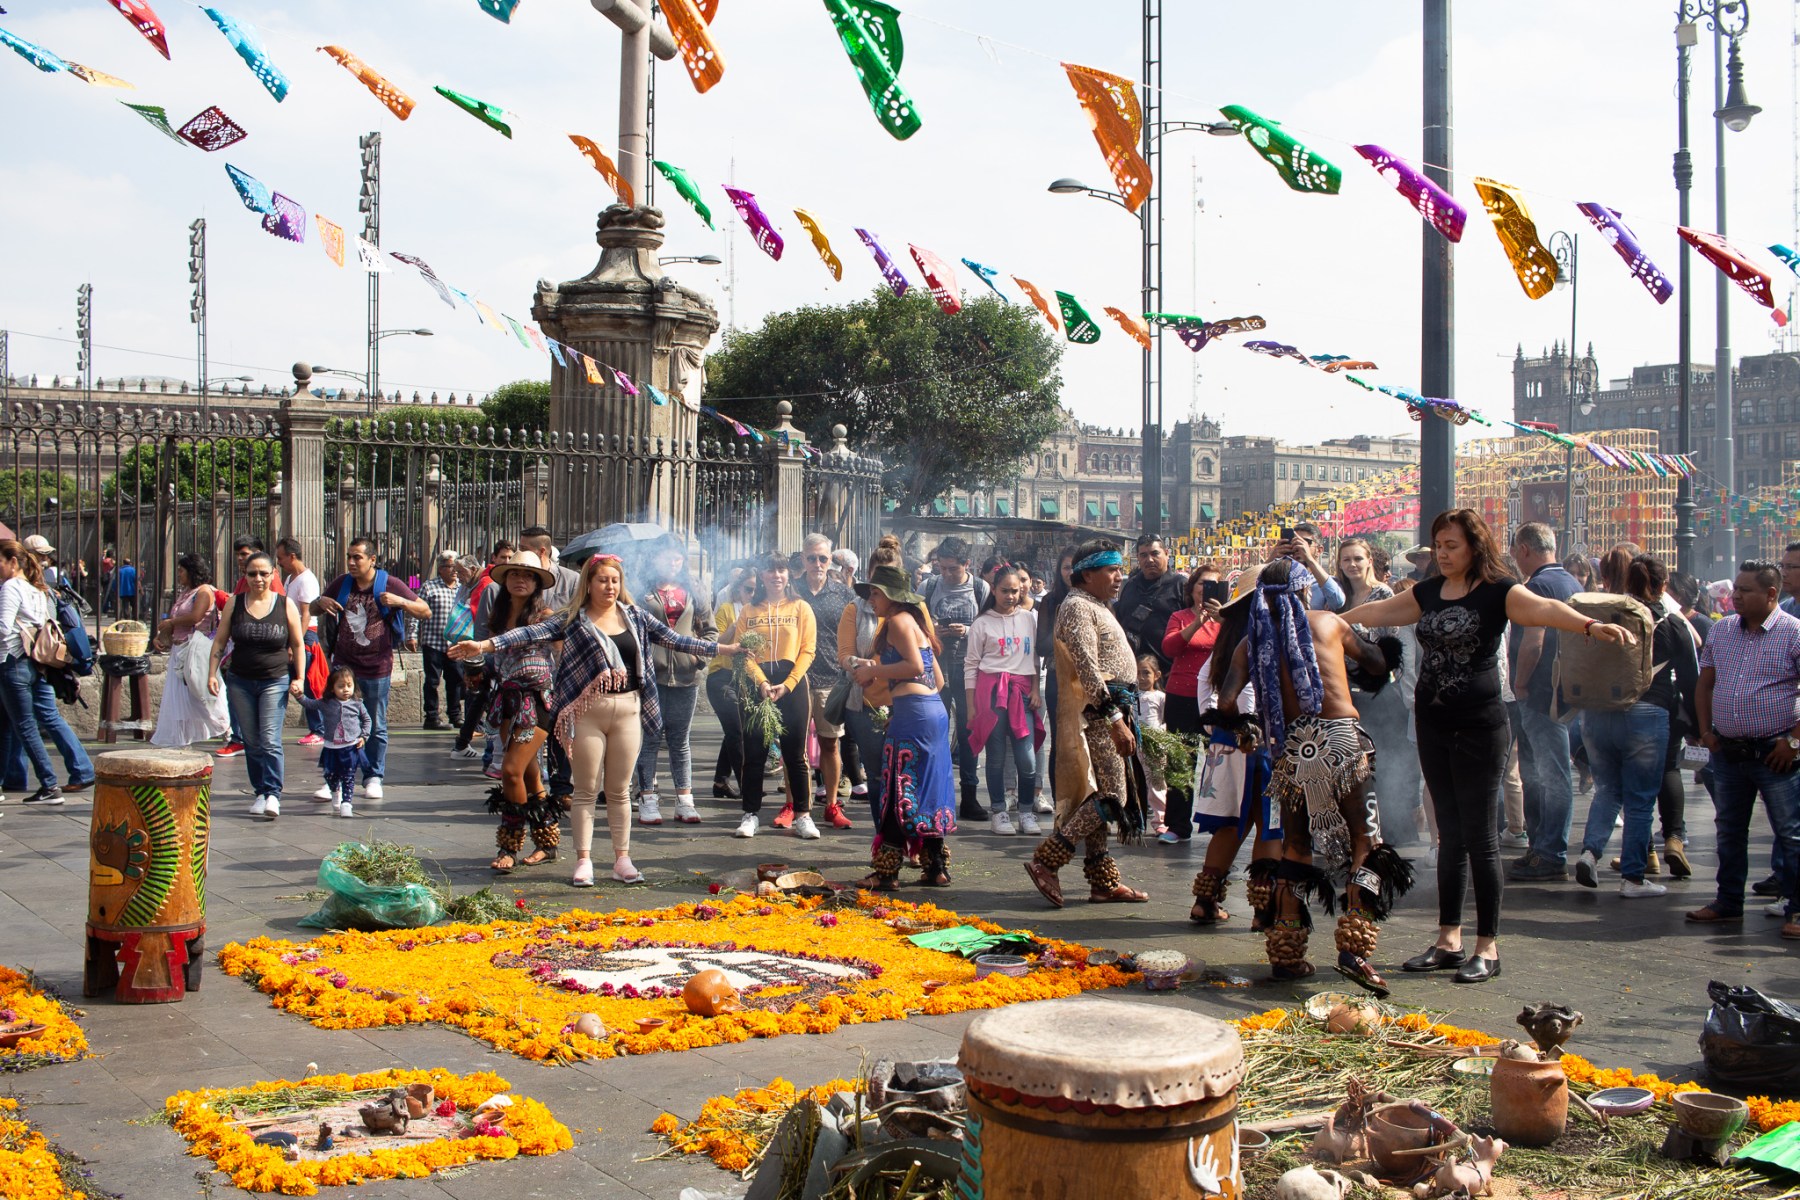 In the city center, indigenous groups perform purifying rituals for locals and tourists alike for a small fee. In the background, giant ofrendas in the main square (El Zócalo) are visited by thousands. 